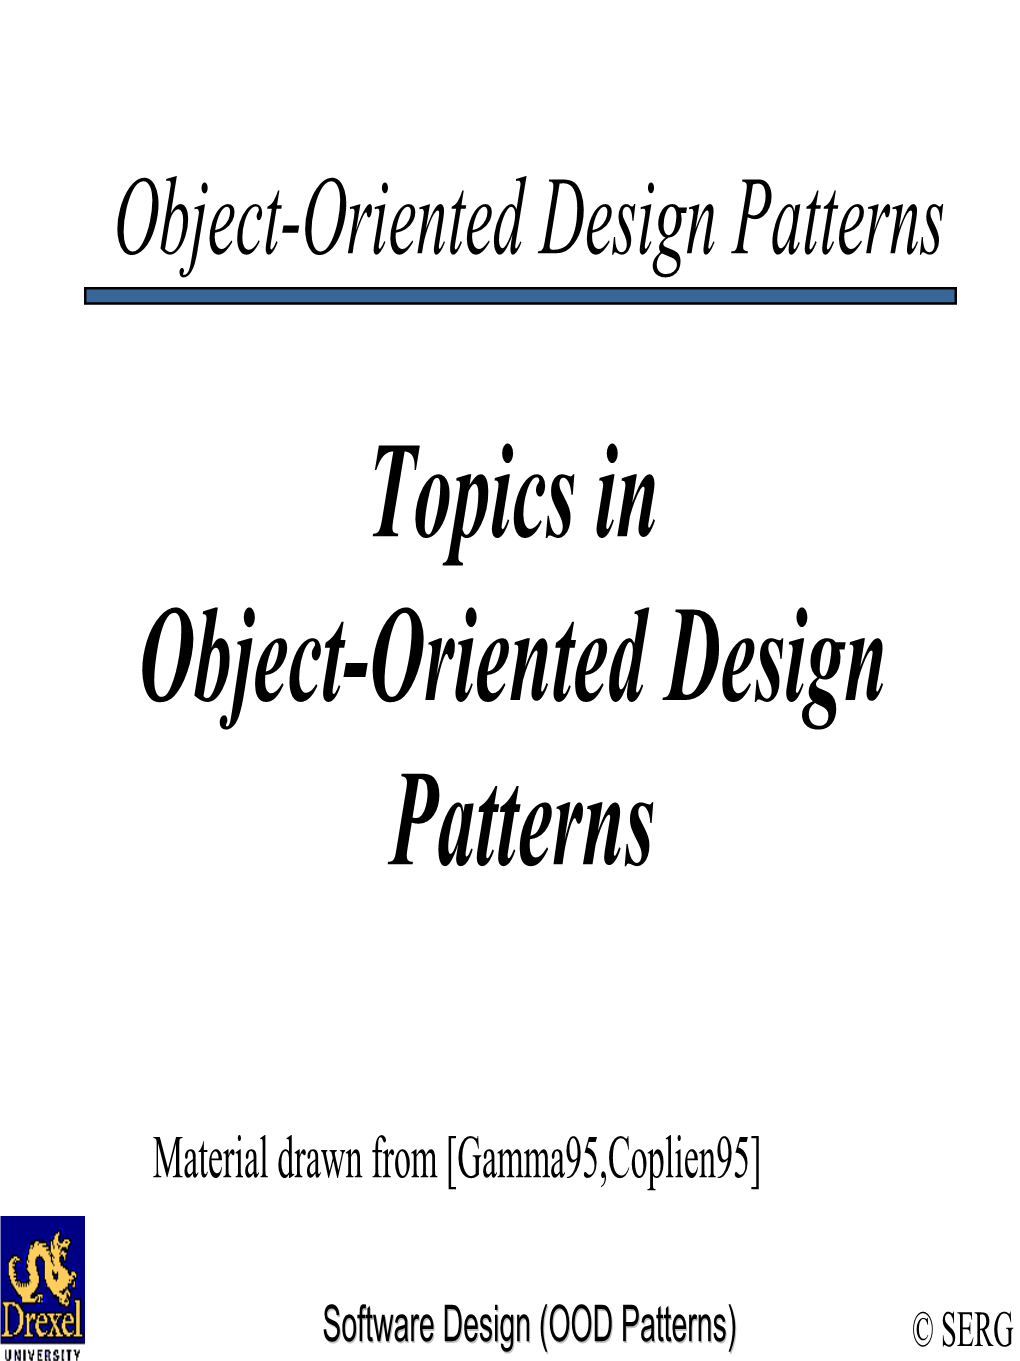 Topics in Object-Oriented Design Patterns